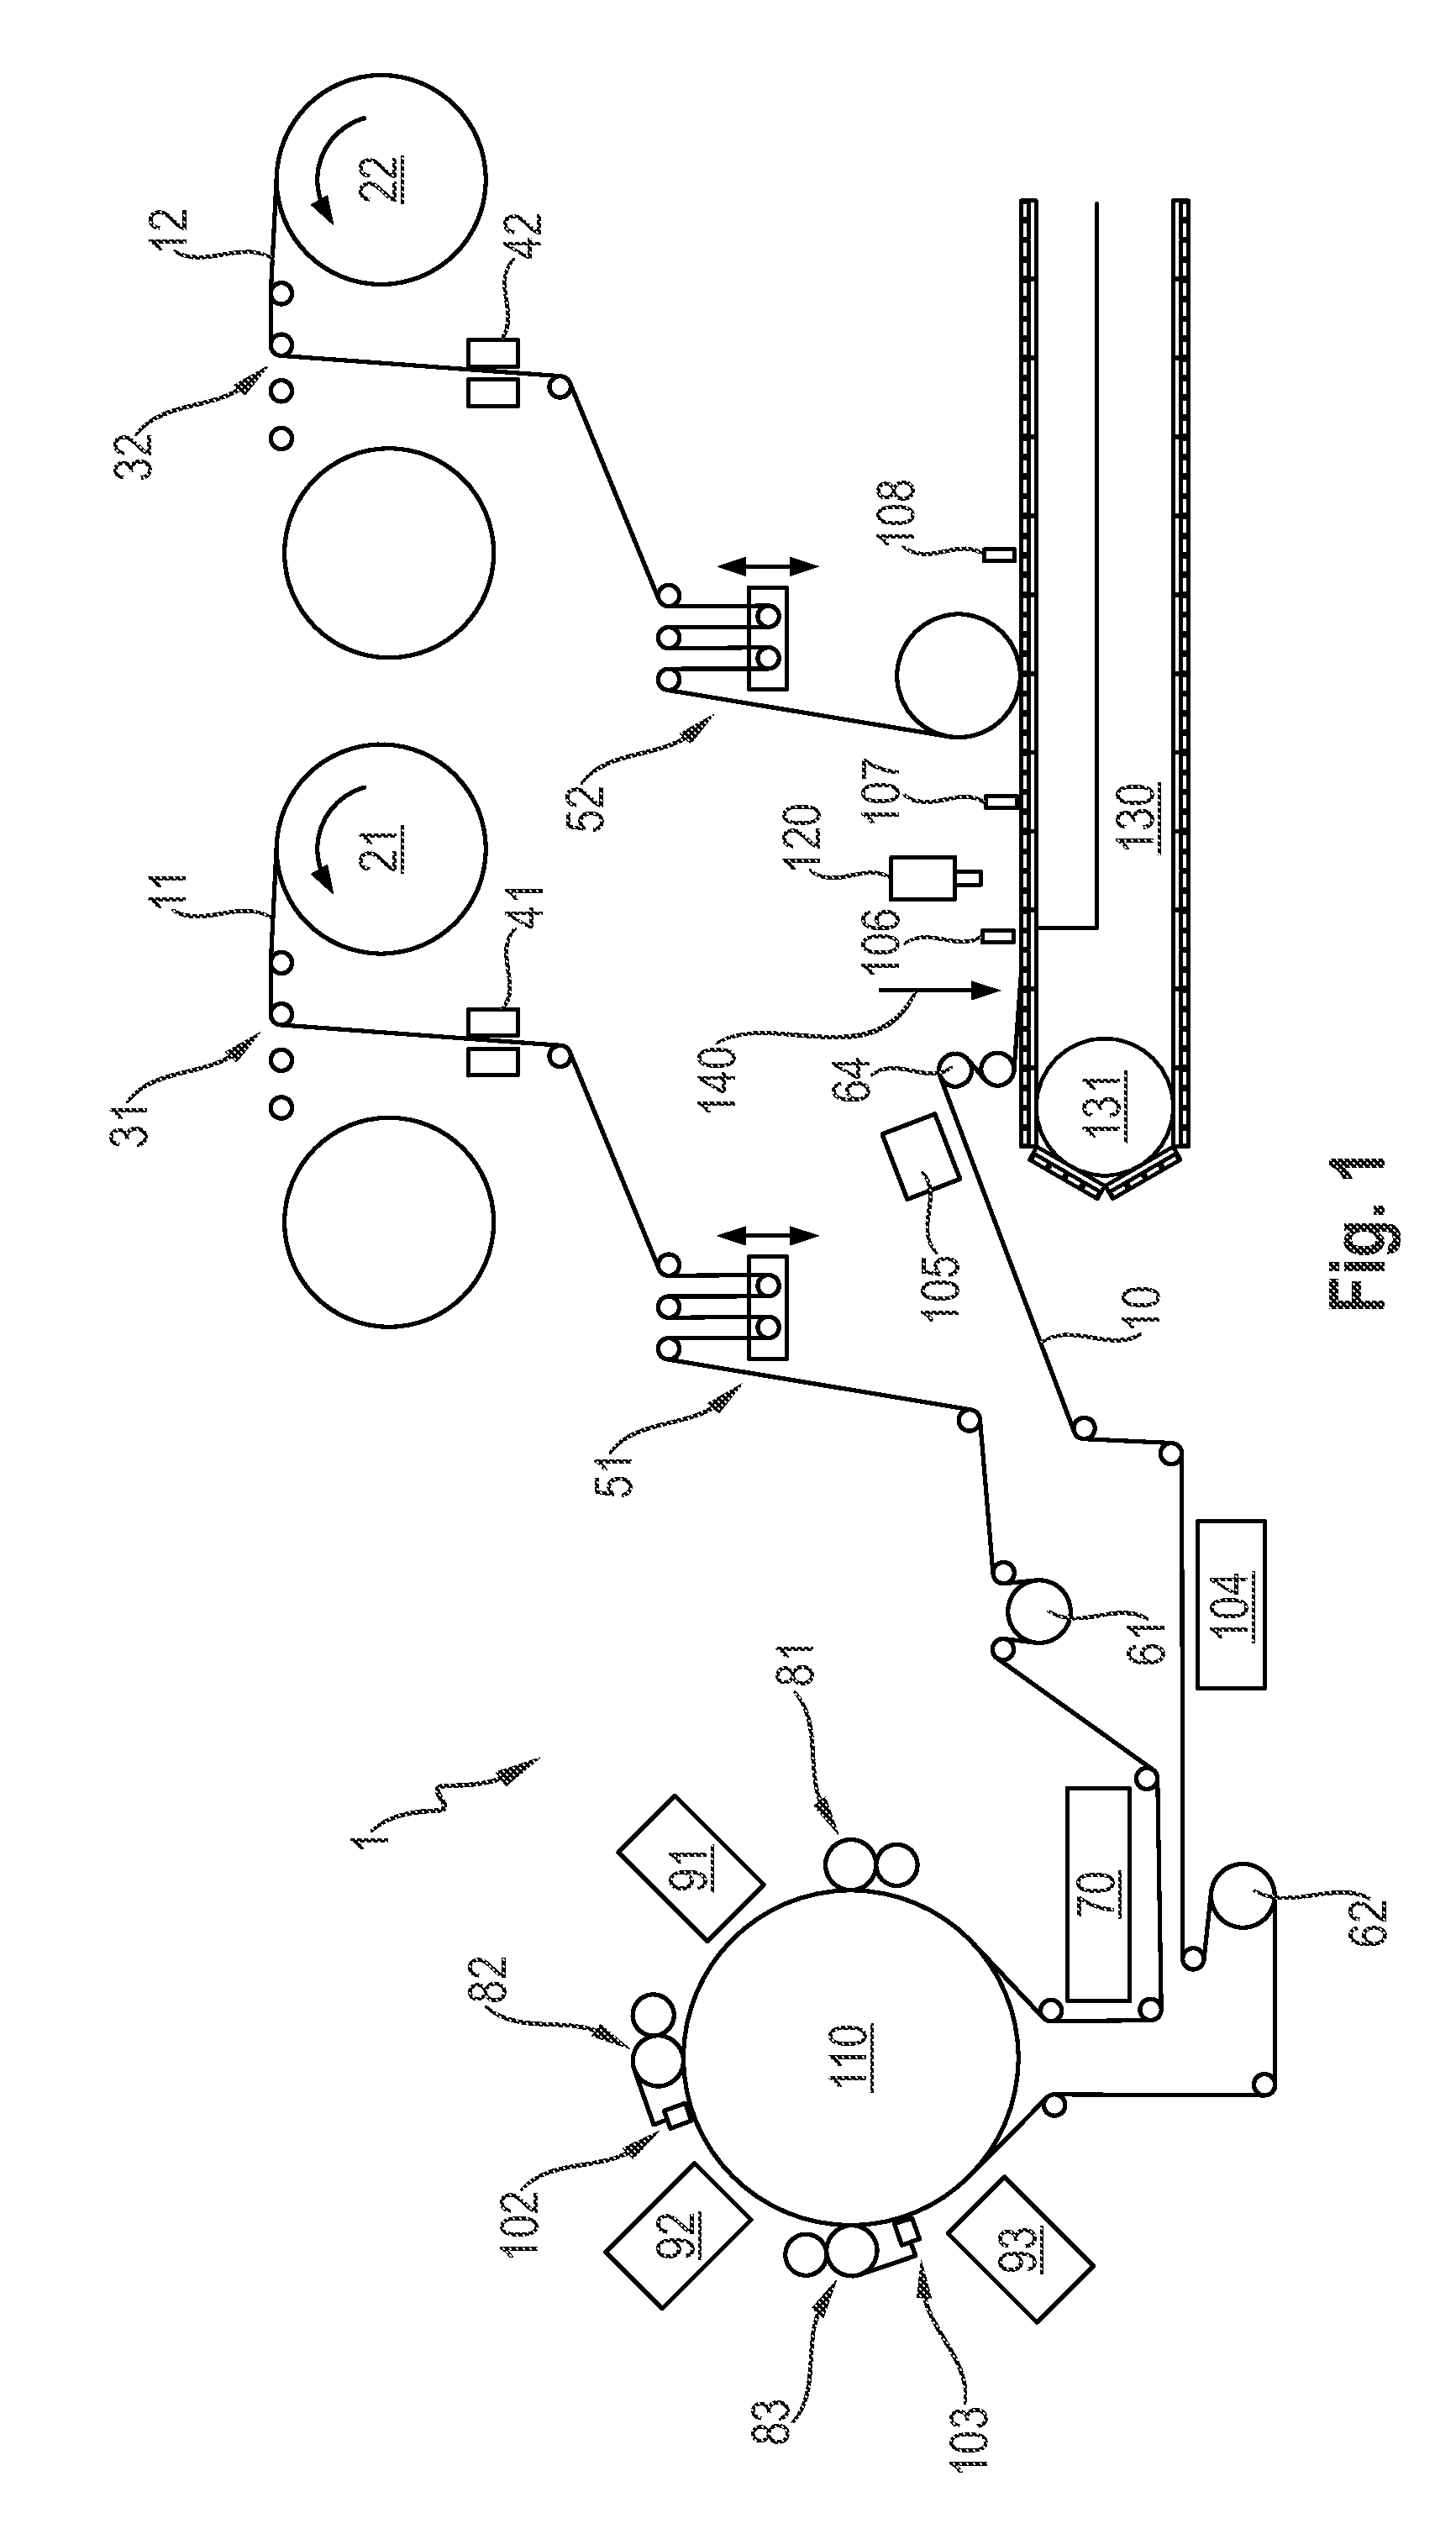 Apparatus for producing pouches